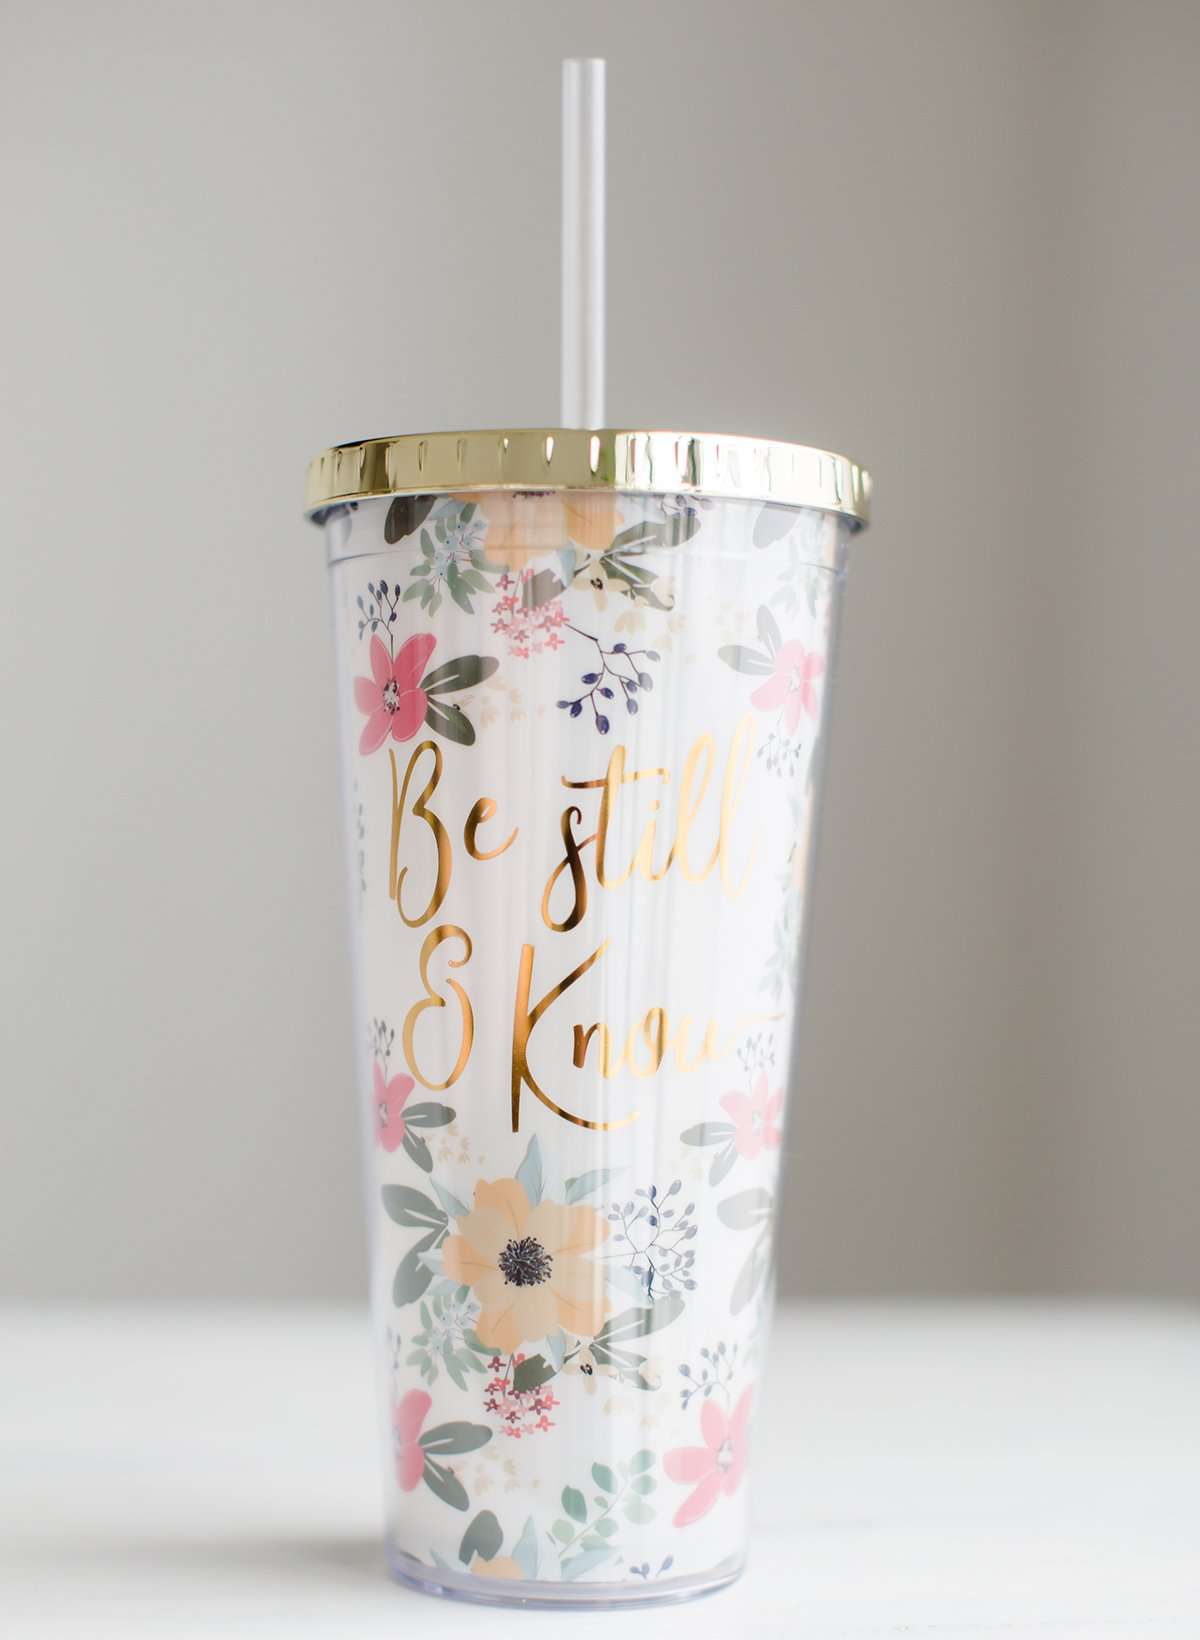 Be still and know double wall tumbler. This tumbler has flowers adorning it and accented with a gold cap and gold writing.